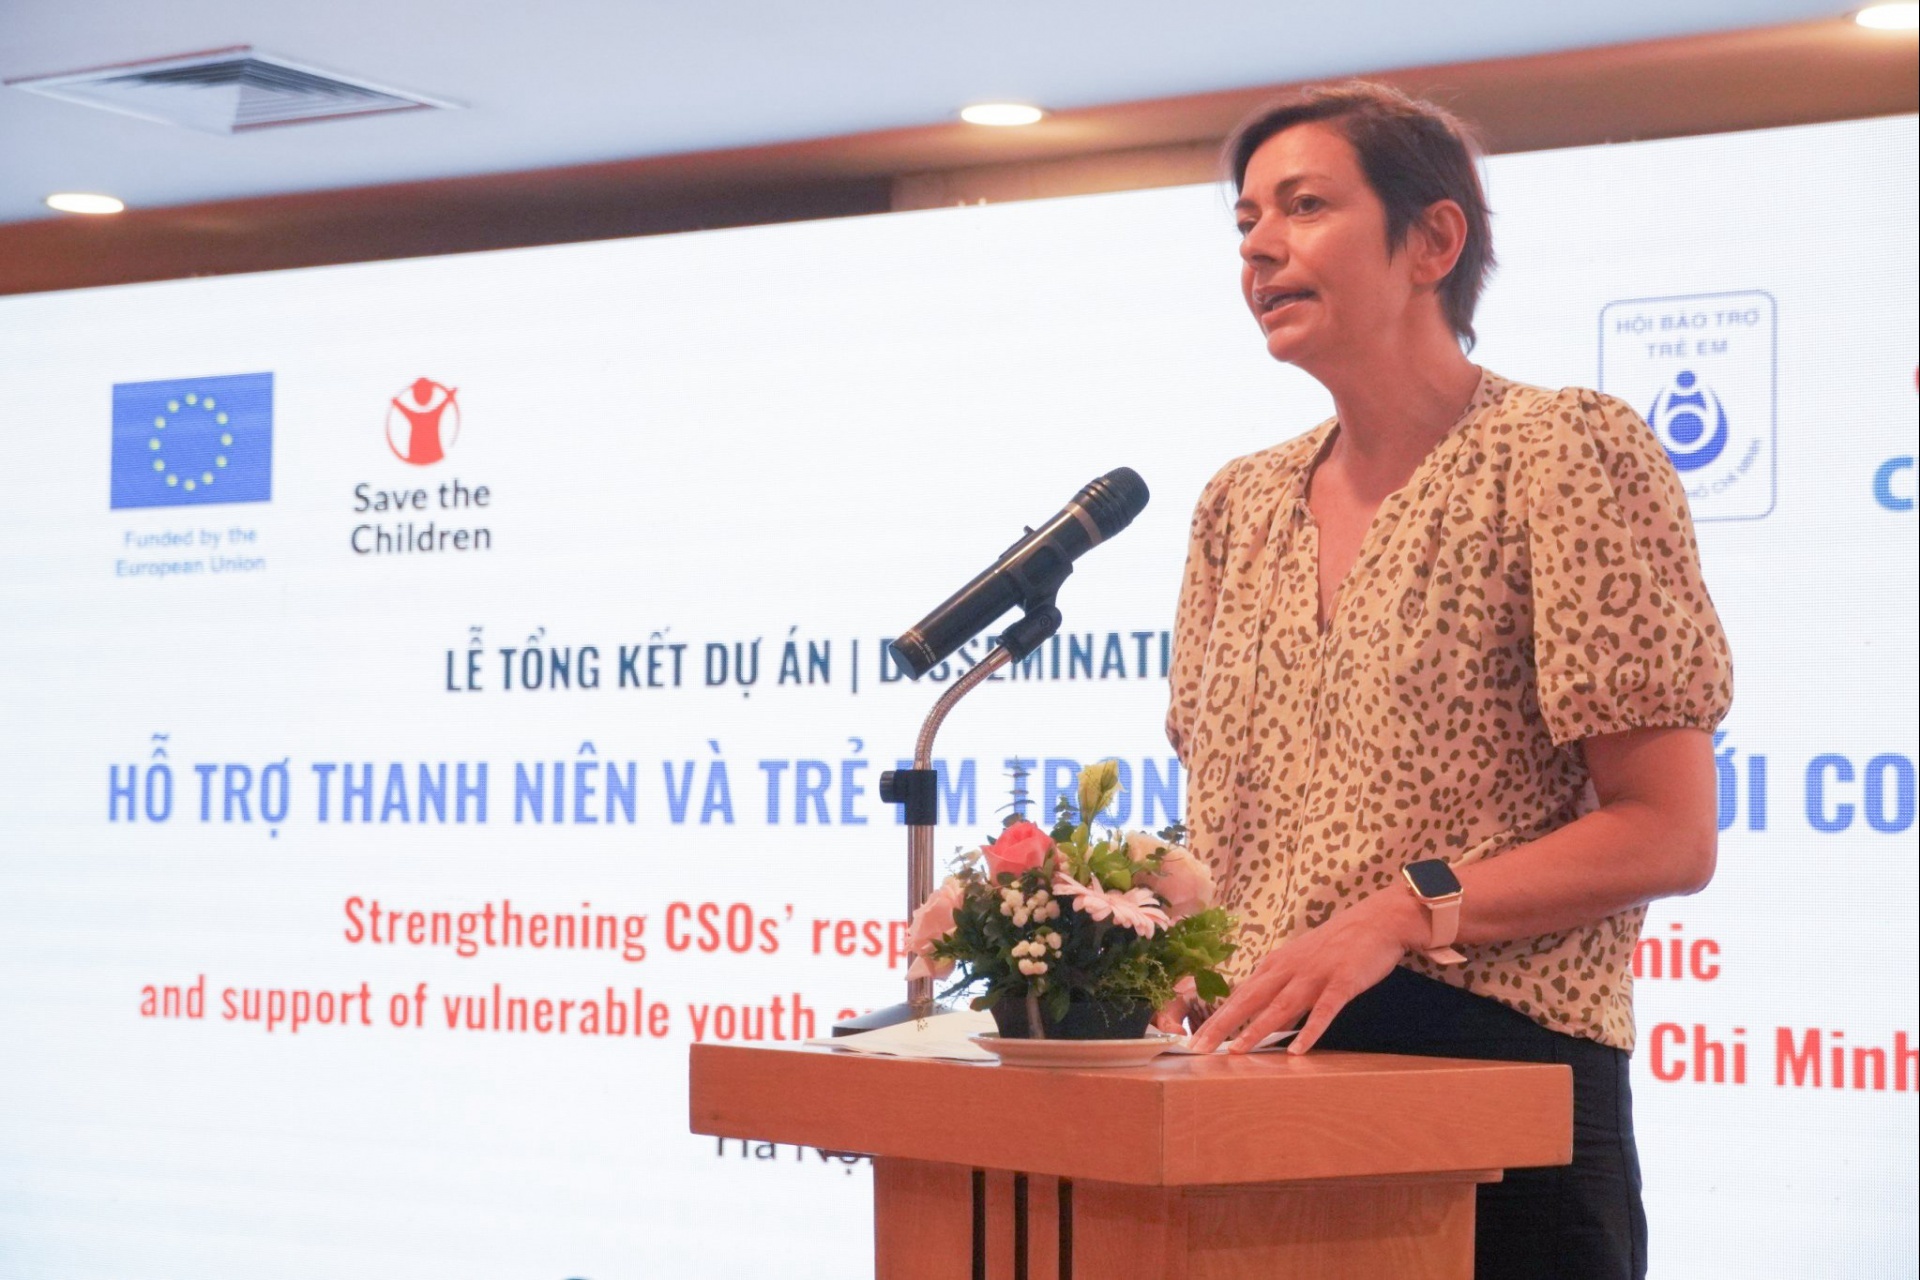 Project in Hanoi and Ho Chi Minh City shares results on pandemic support work